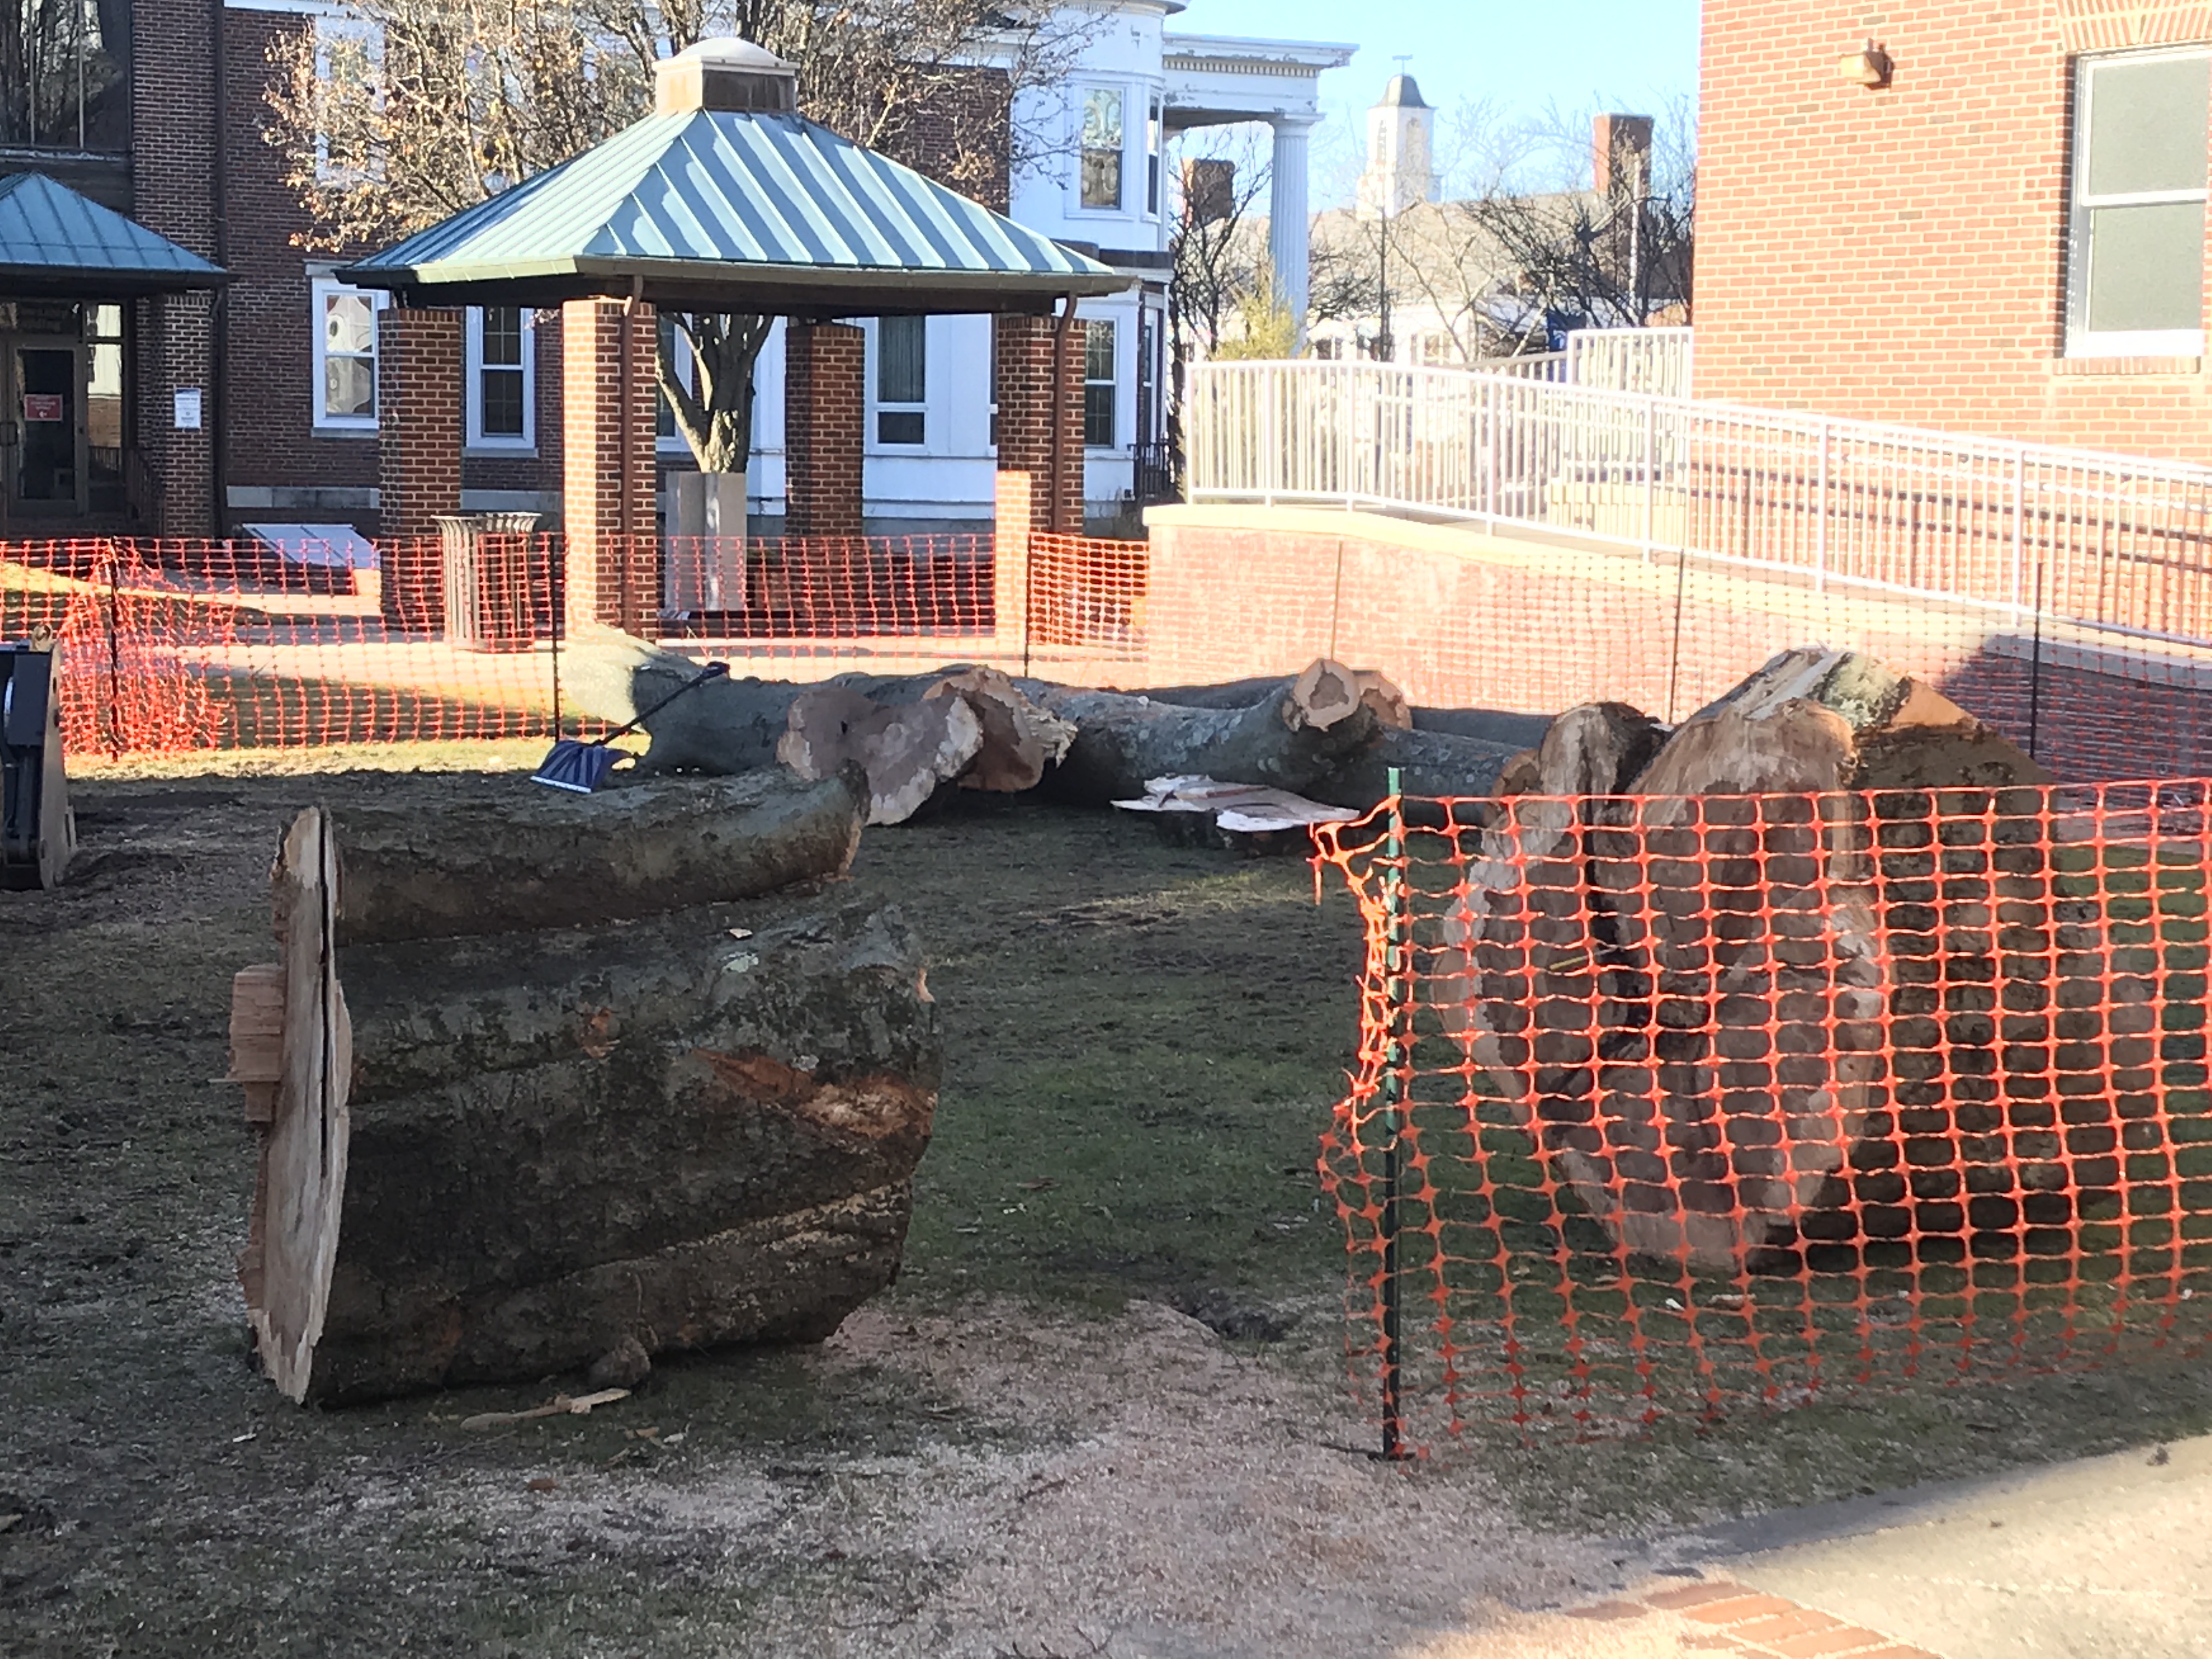 The remnants of a nearly century-old tree cut down in Toms River, Dec. 4, 2018. (Photo: Daniel Nee)